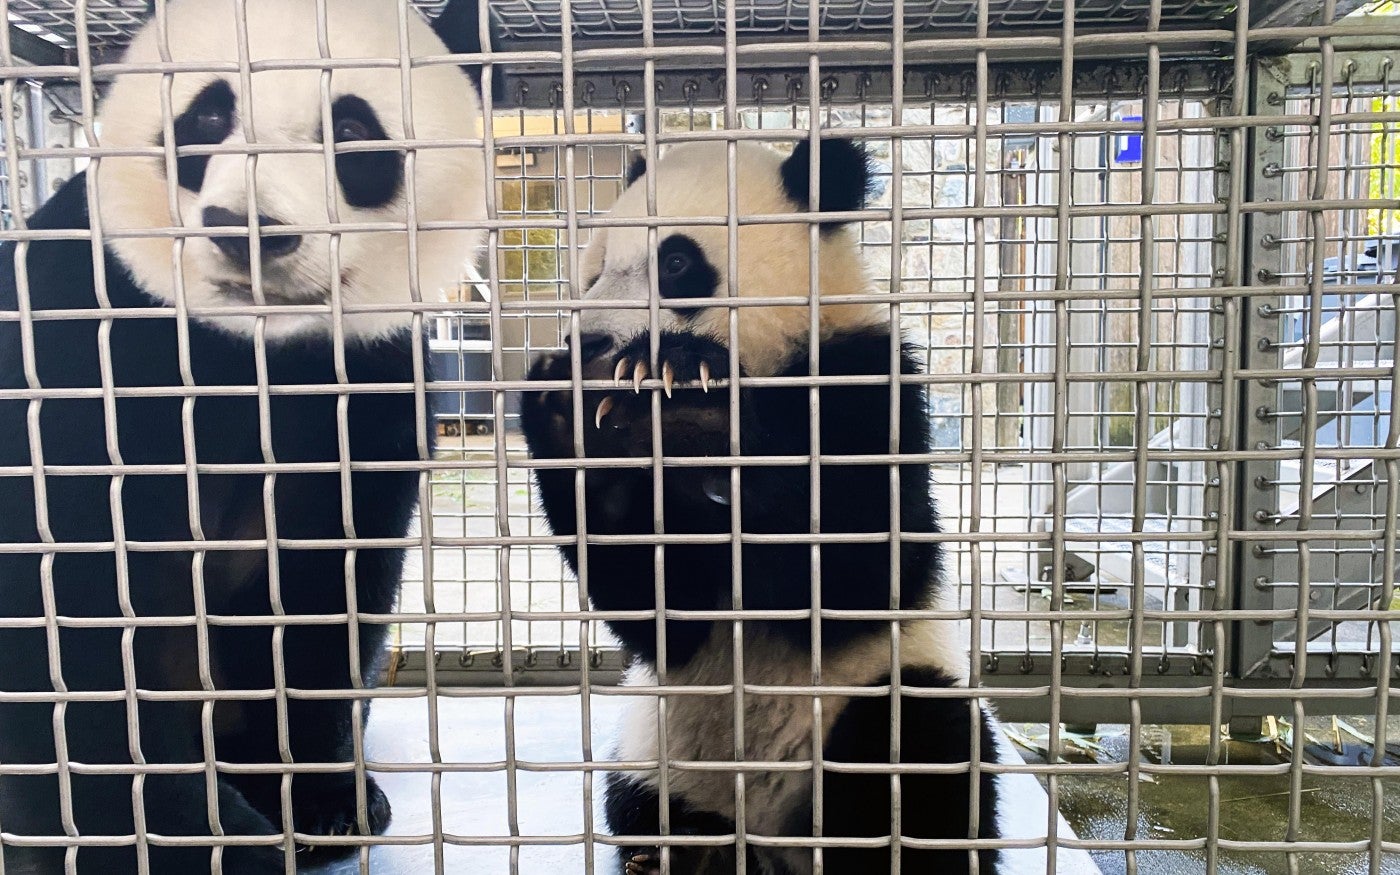 Giant panda Mei Xiang and her son Xiao Qi Ji stand on a scale in a chute that connects the bears' indoor and outdoor habitats.